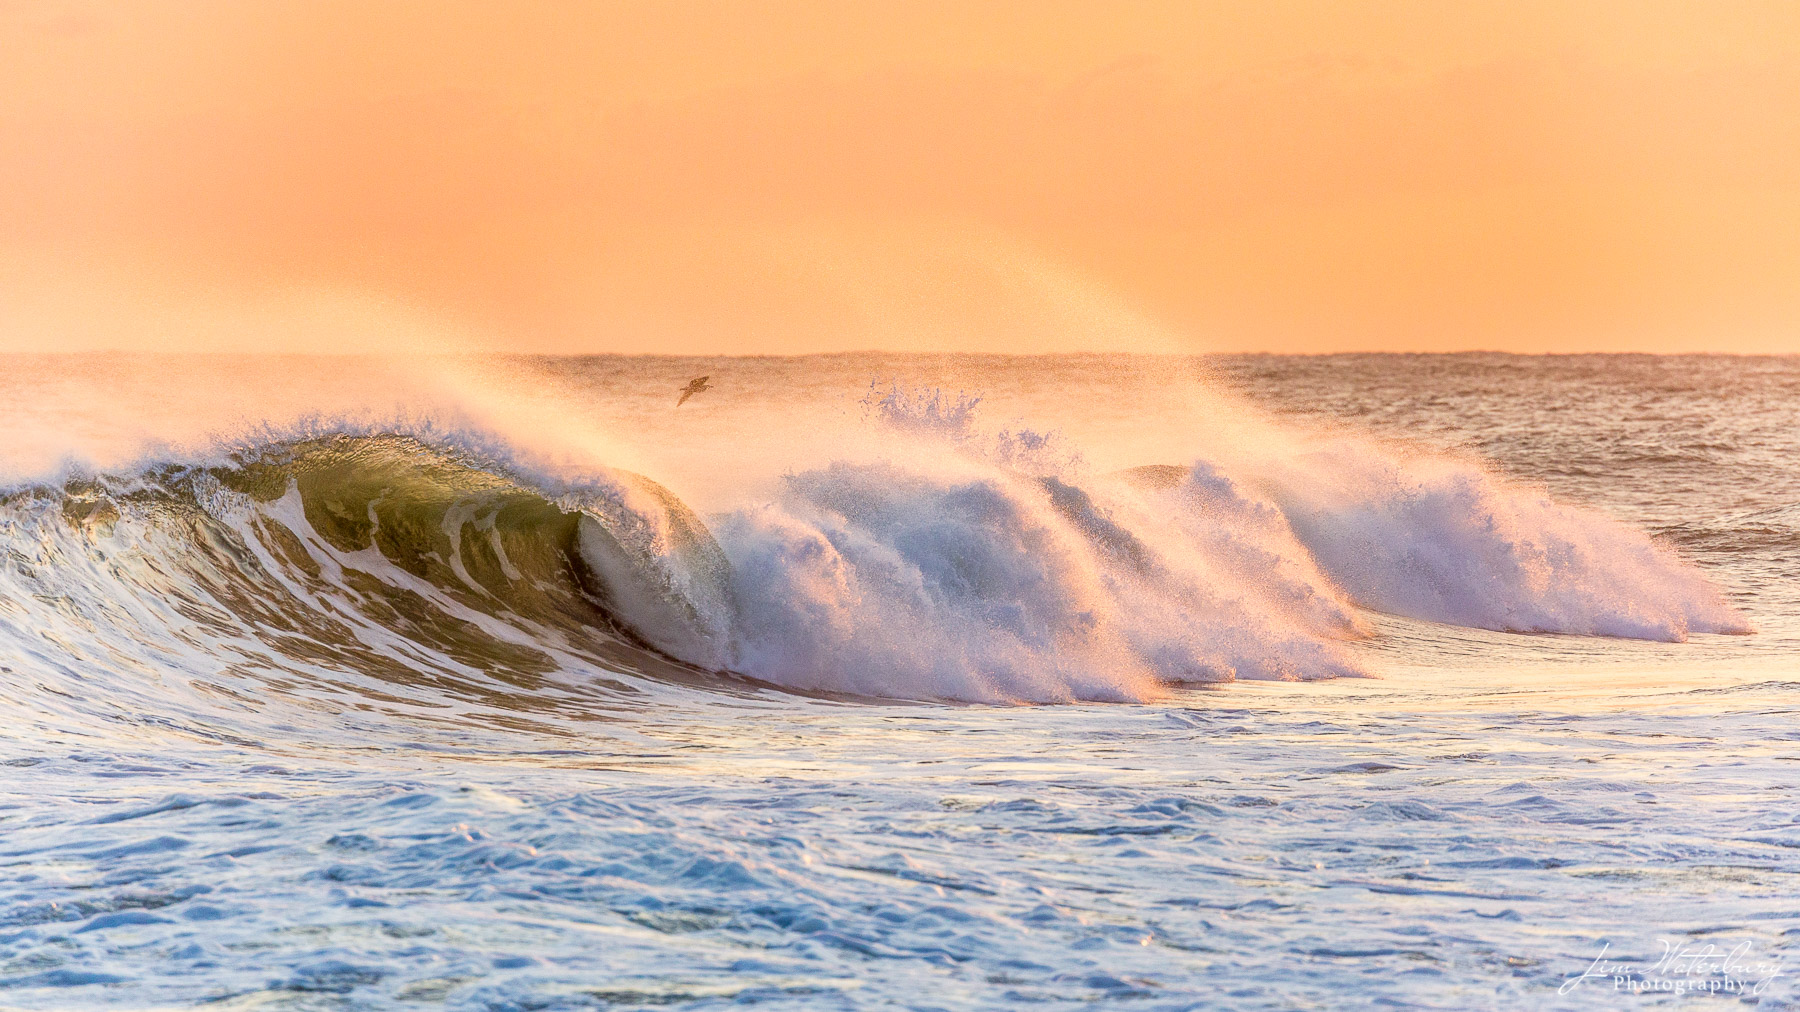 In late evening light, a stiff offshore wind blows spray back from the tops of crashing waves.